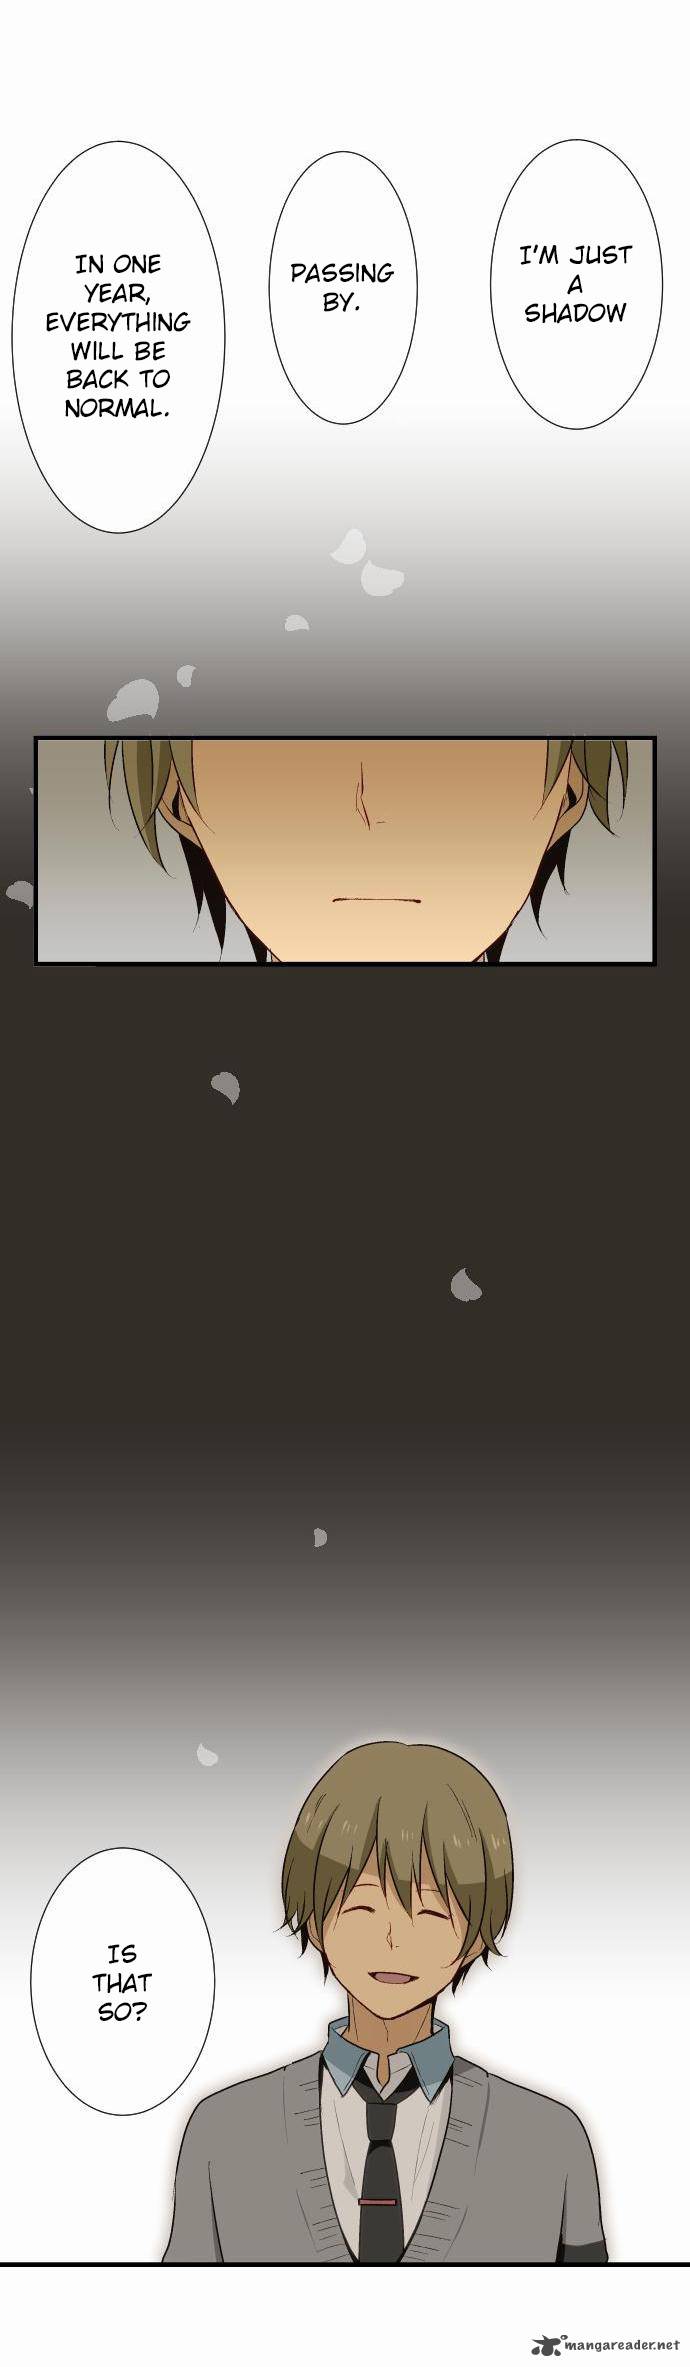 Relife 13 11